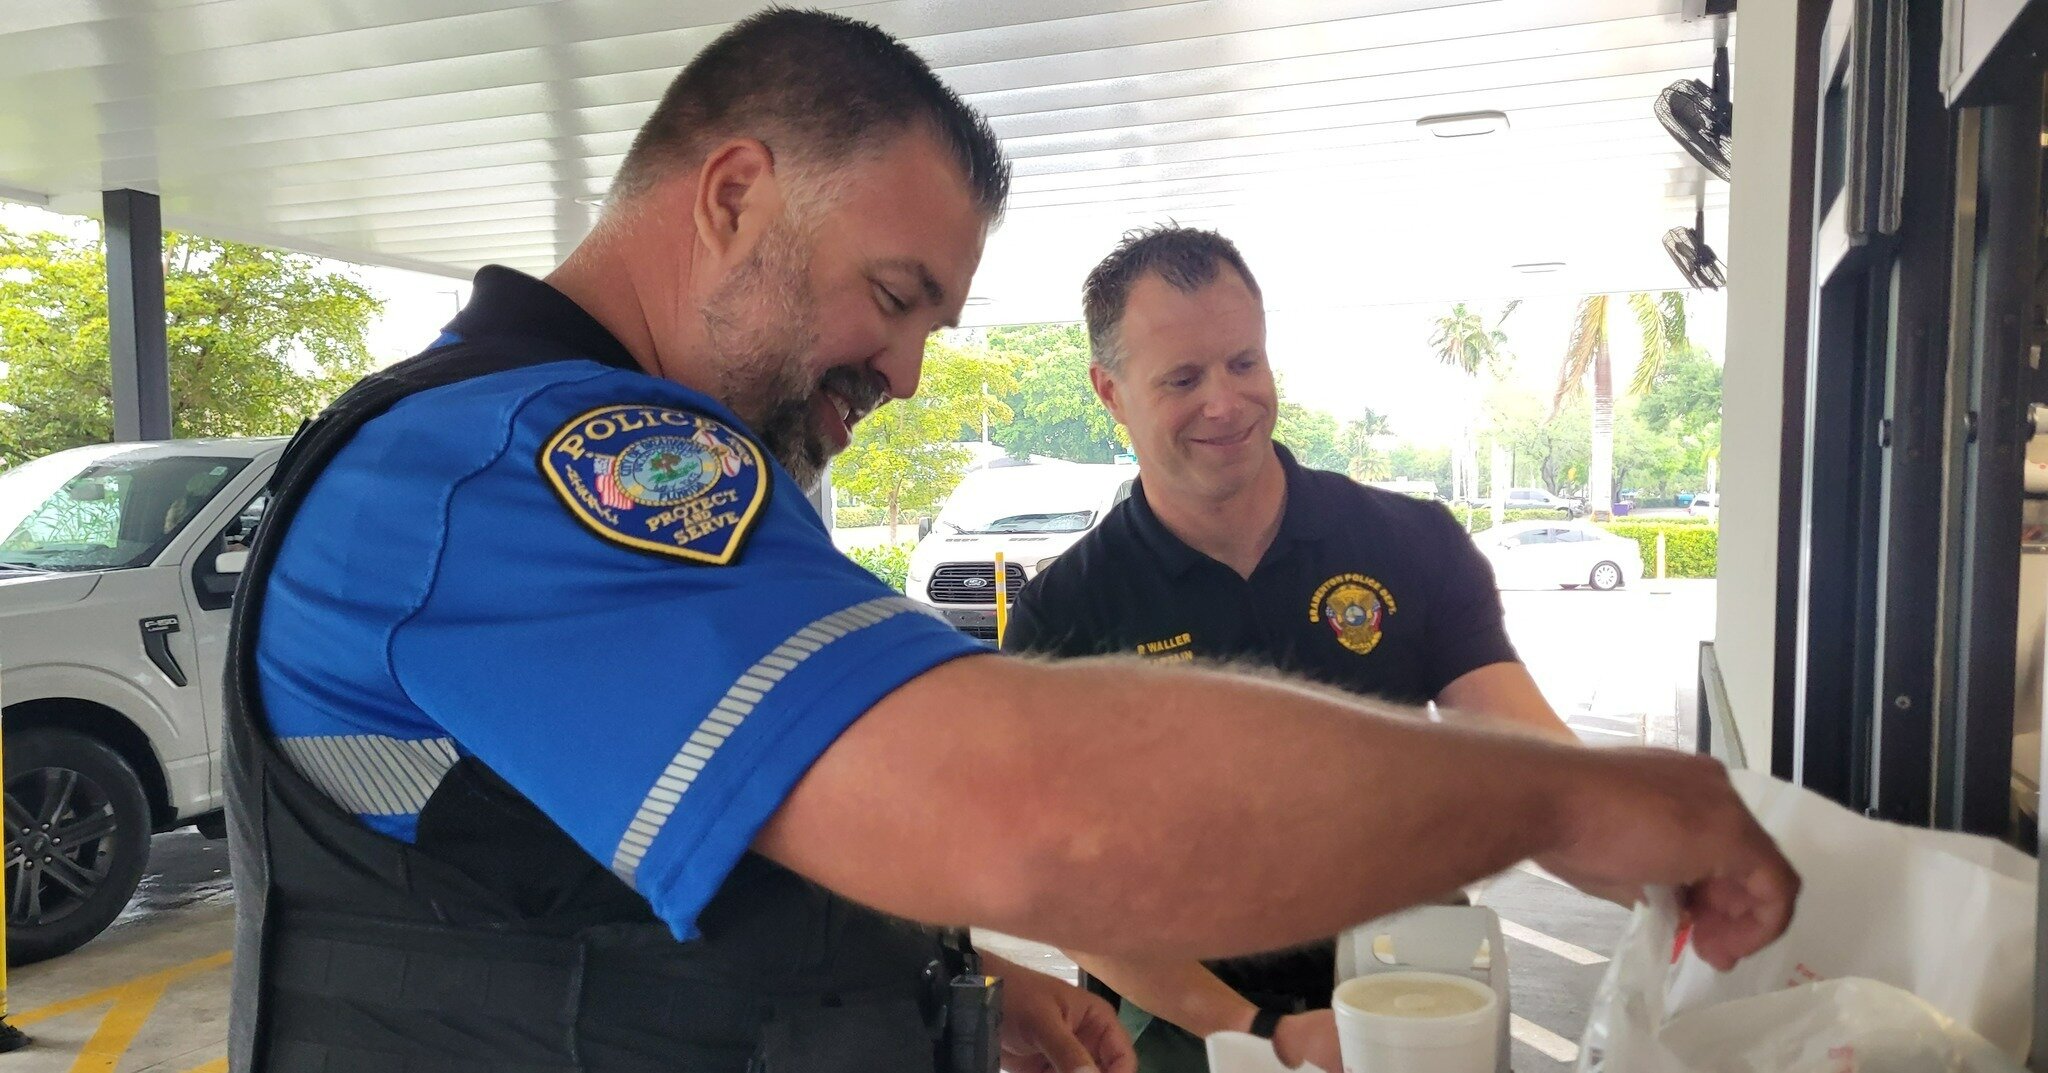 BPD's second Chick-fil-A Protect and Serve event at @chickfila_manateeave was a success - and we're getting pretty good at helping out in the drive-thru lanes if we do say so ourselves! It's fun to surprise patrons and say hello while helping serve t